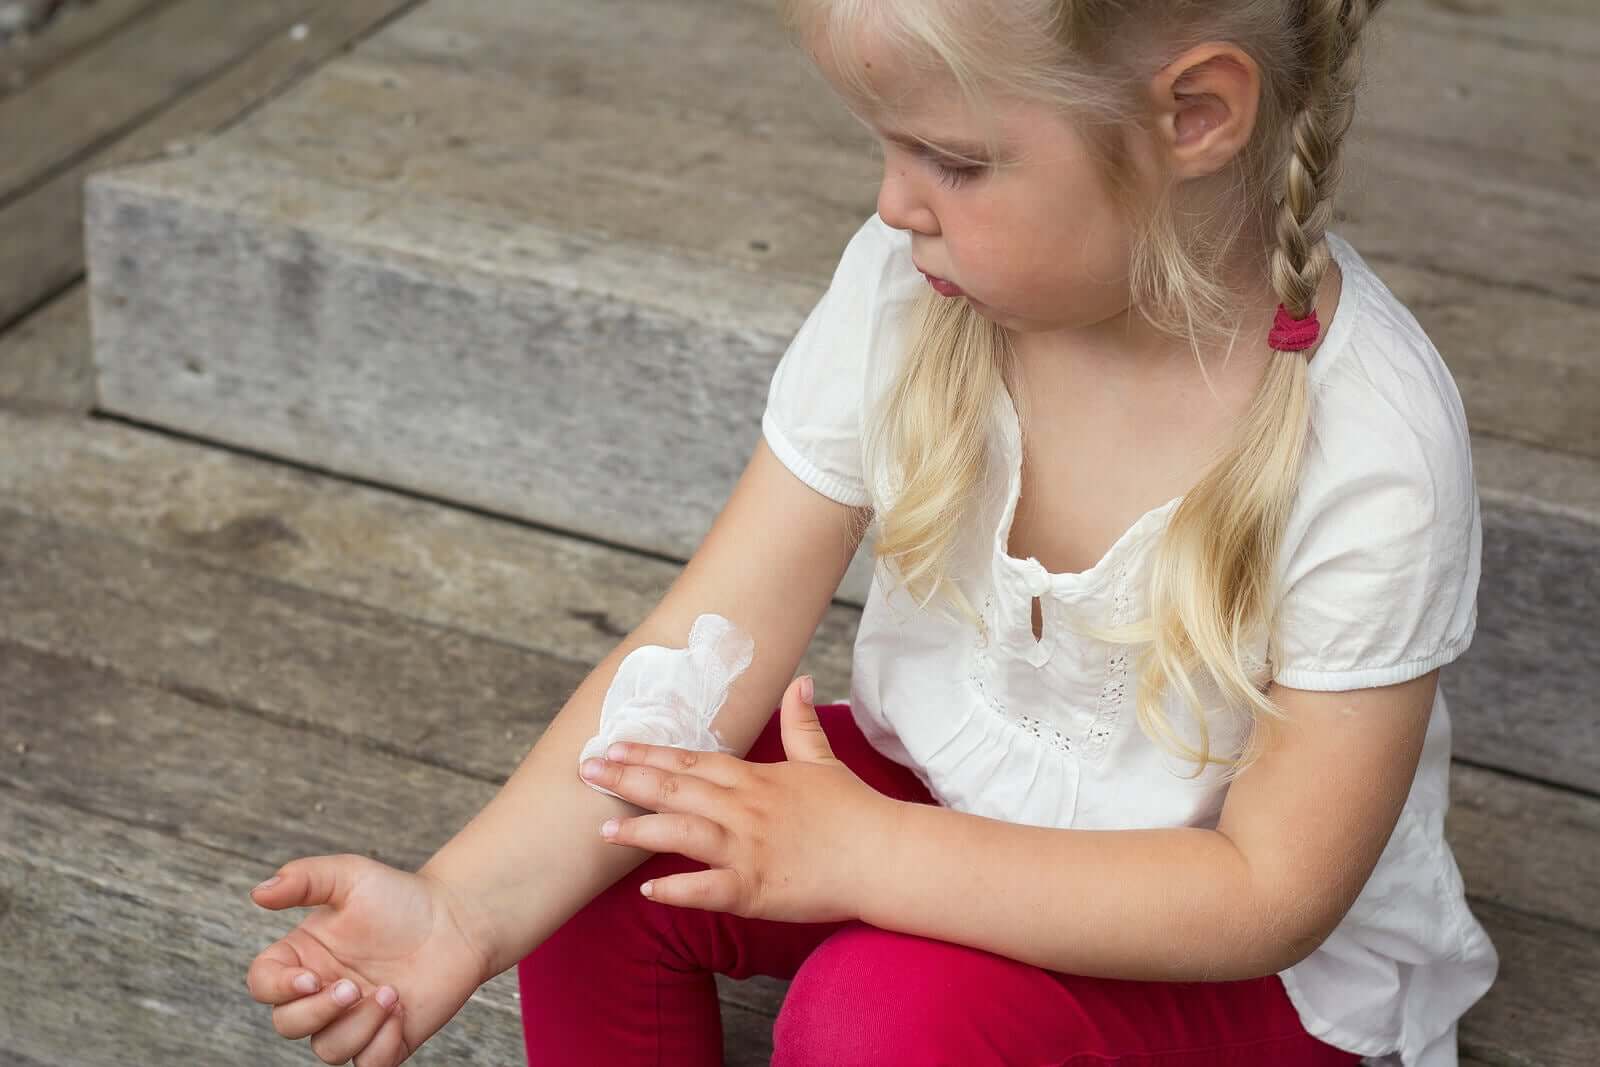 A child rubbing lotion on her arm.